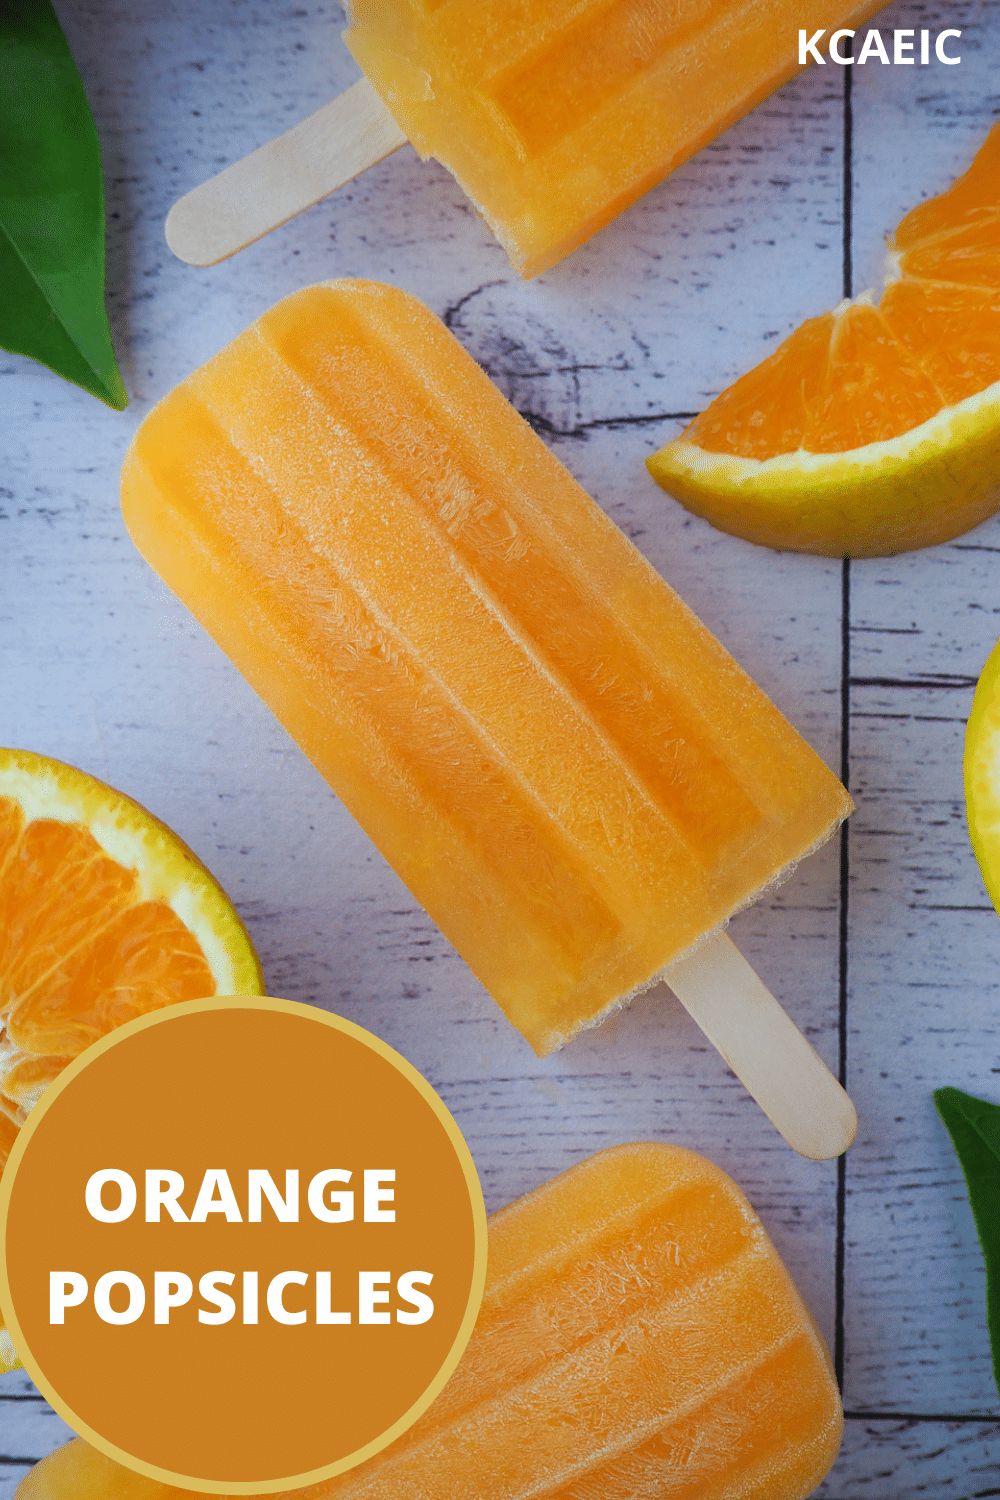 Orange popsicles in a vertical row, with fresh orange and orange leaves and text overlay, orange popsicles, KCAEIC.